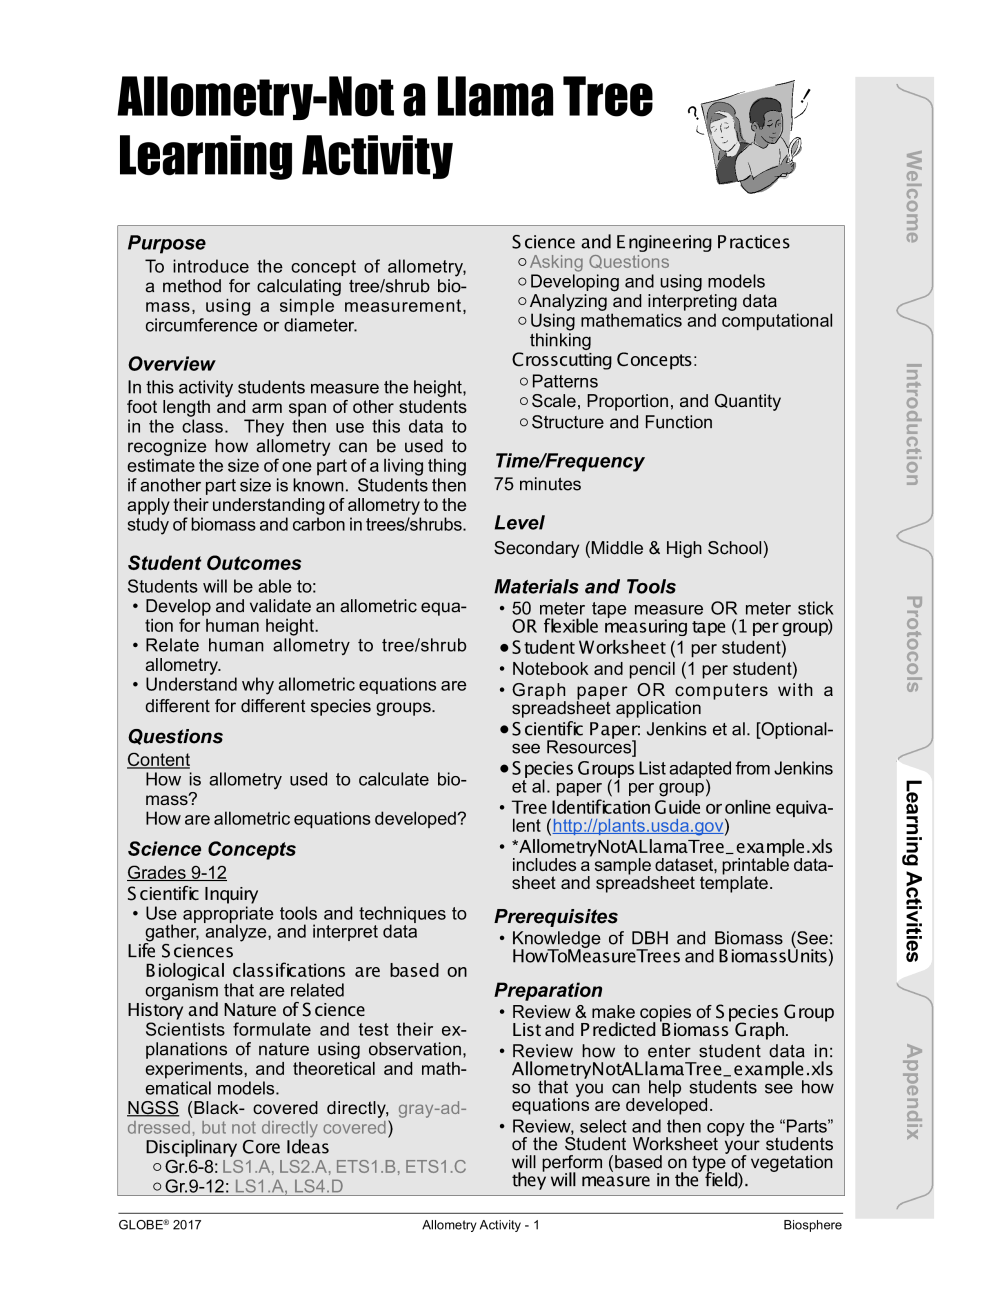 Learning Activities preview for H. Allometry